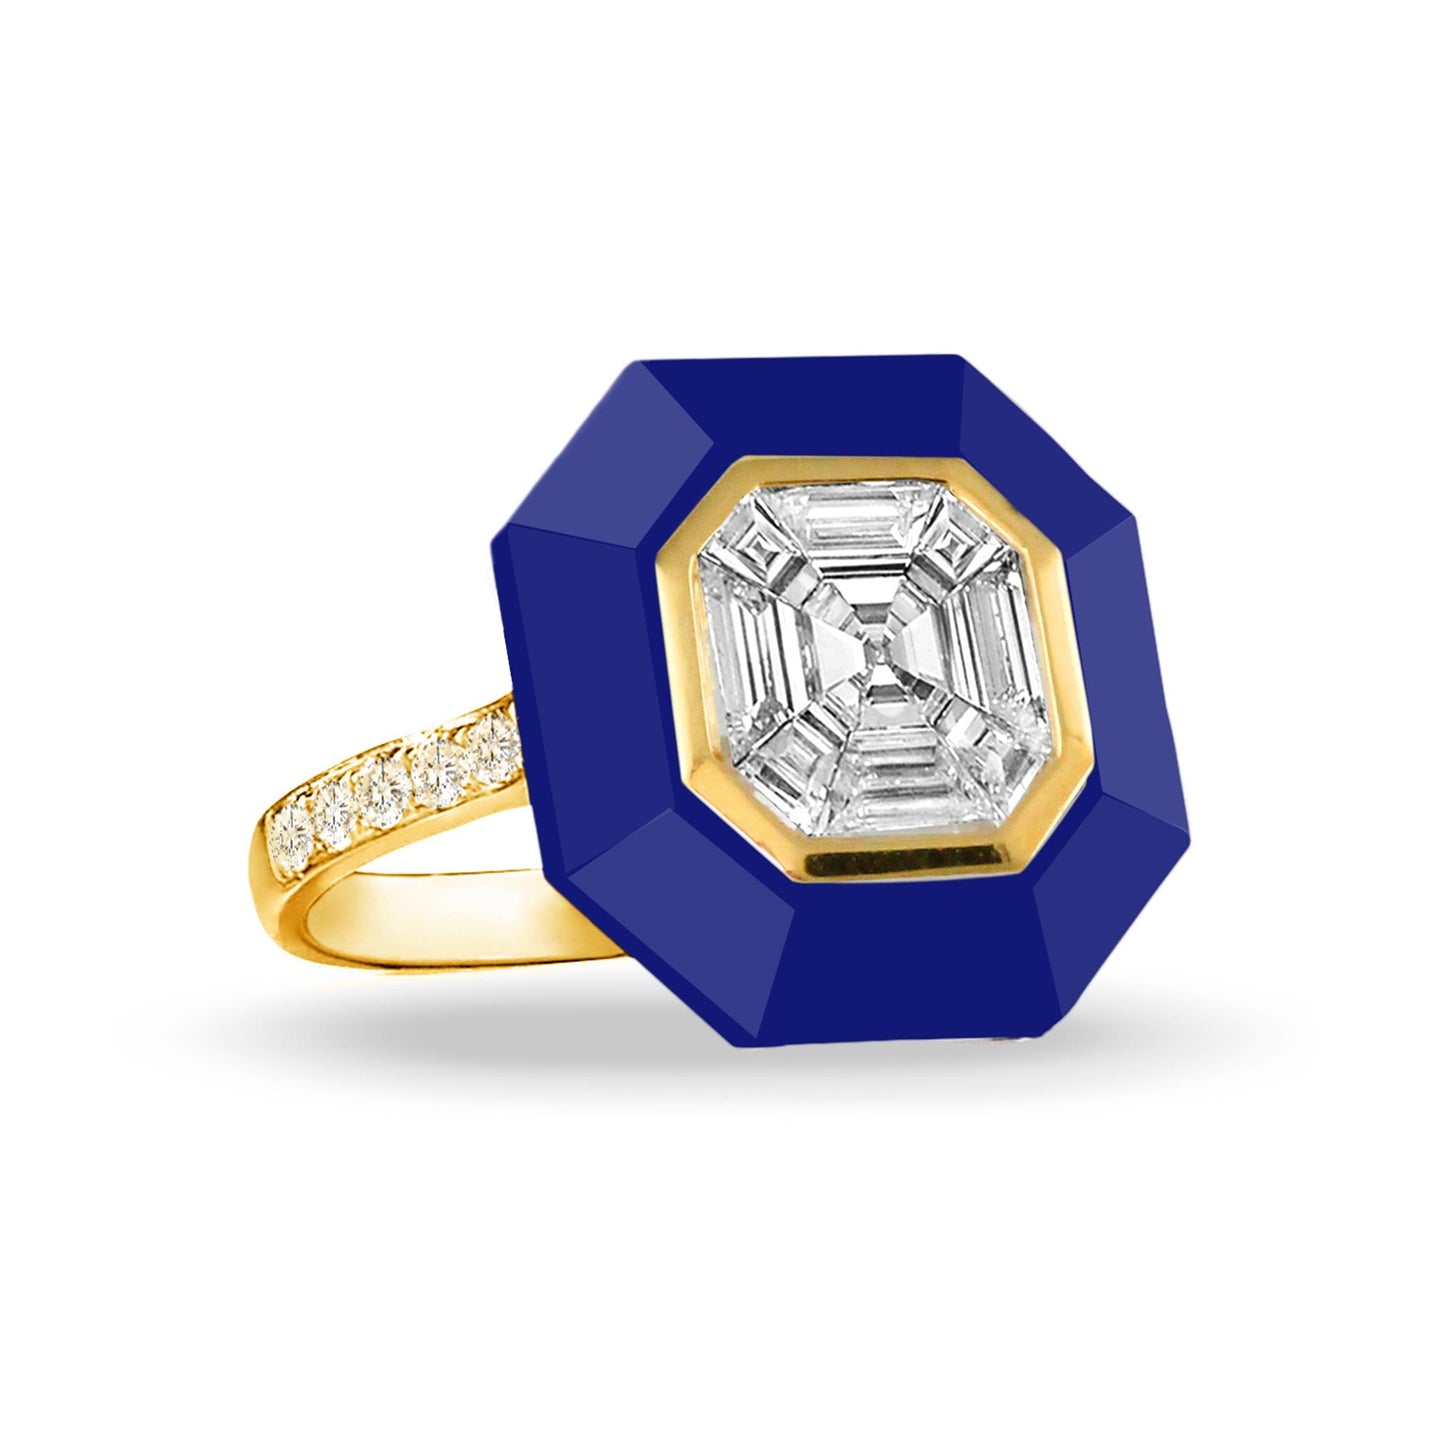 18K Yellow Gold Invisible Diamond Ring with a Halo of Blue Lapiz